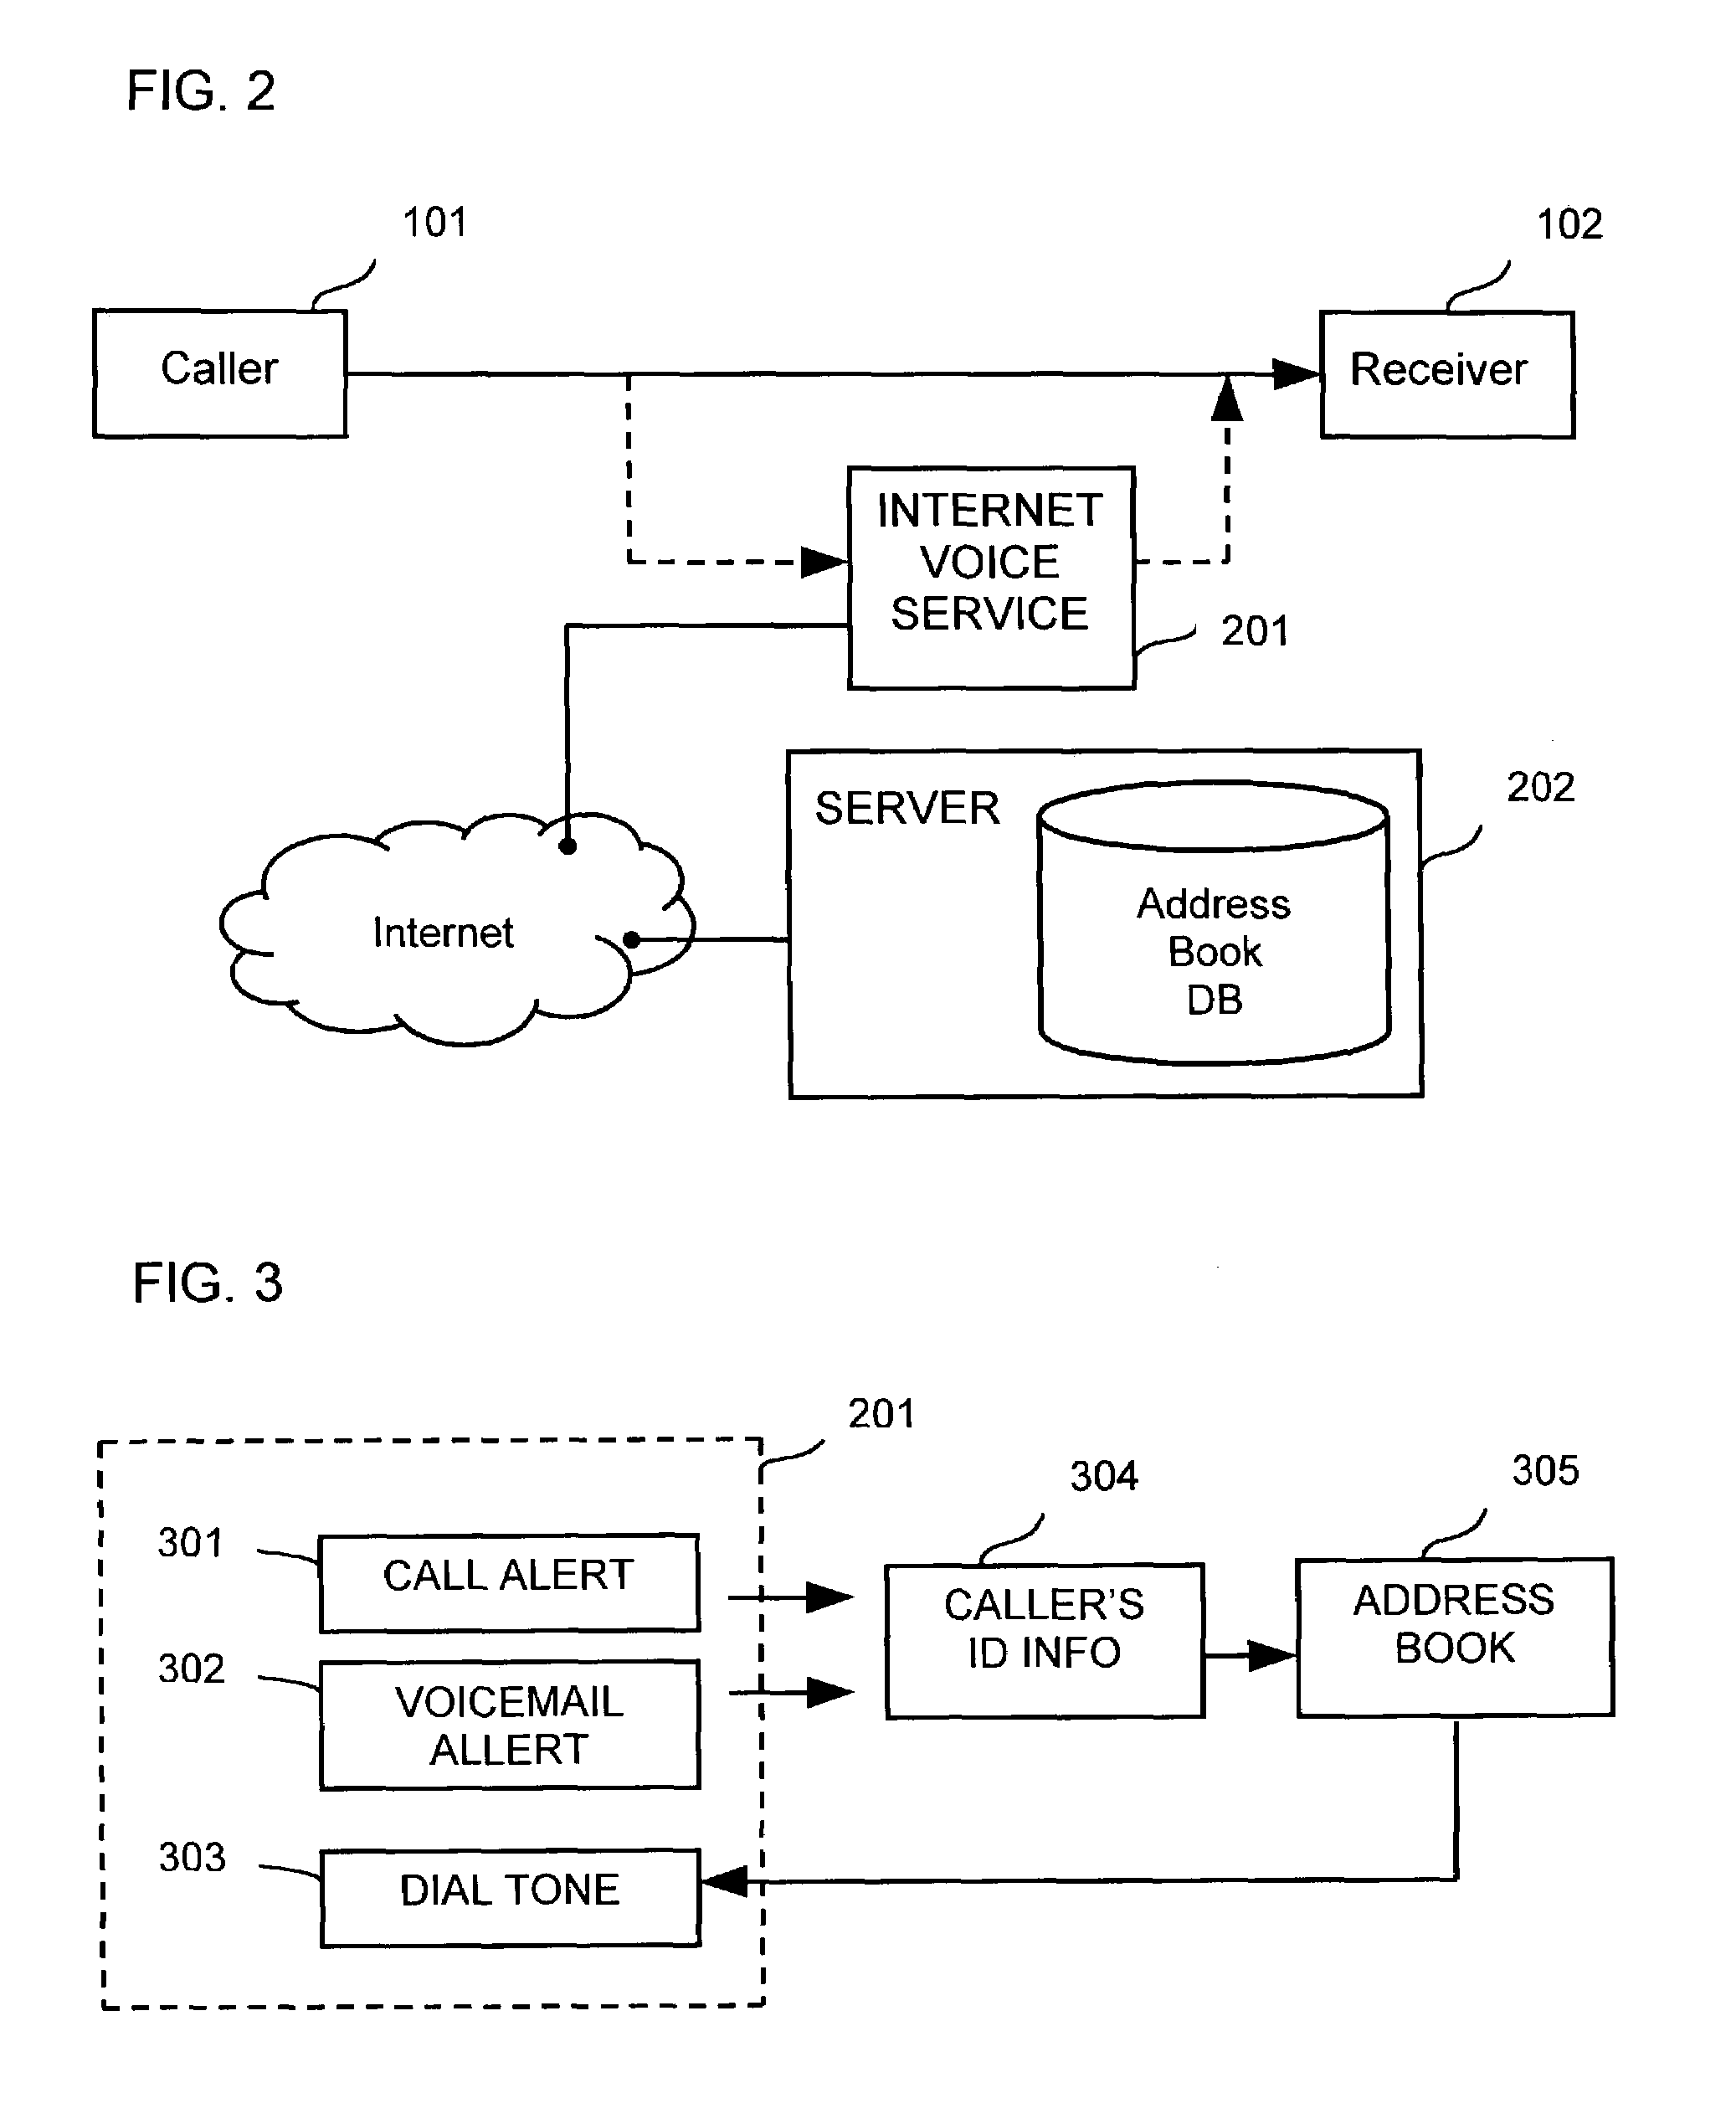 Method for populating a caller's information to a host-based address book